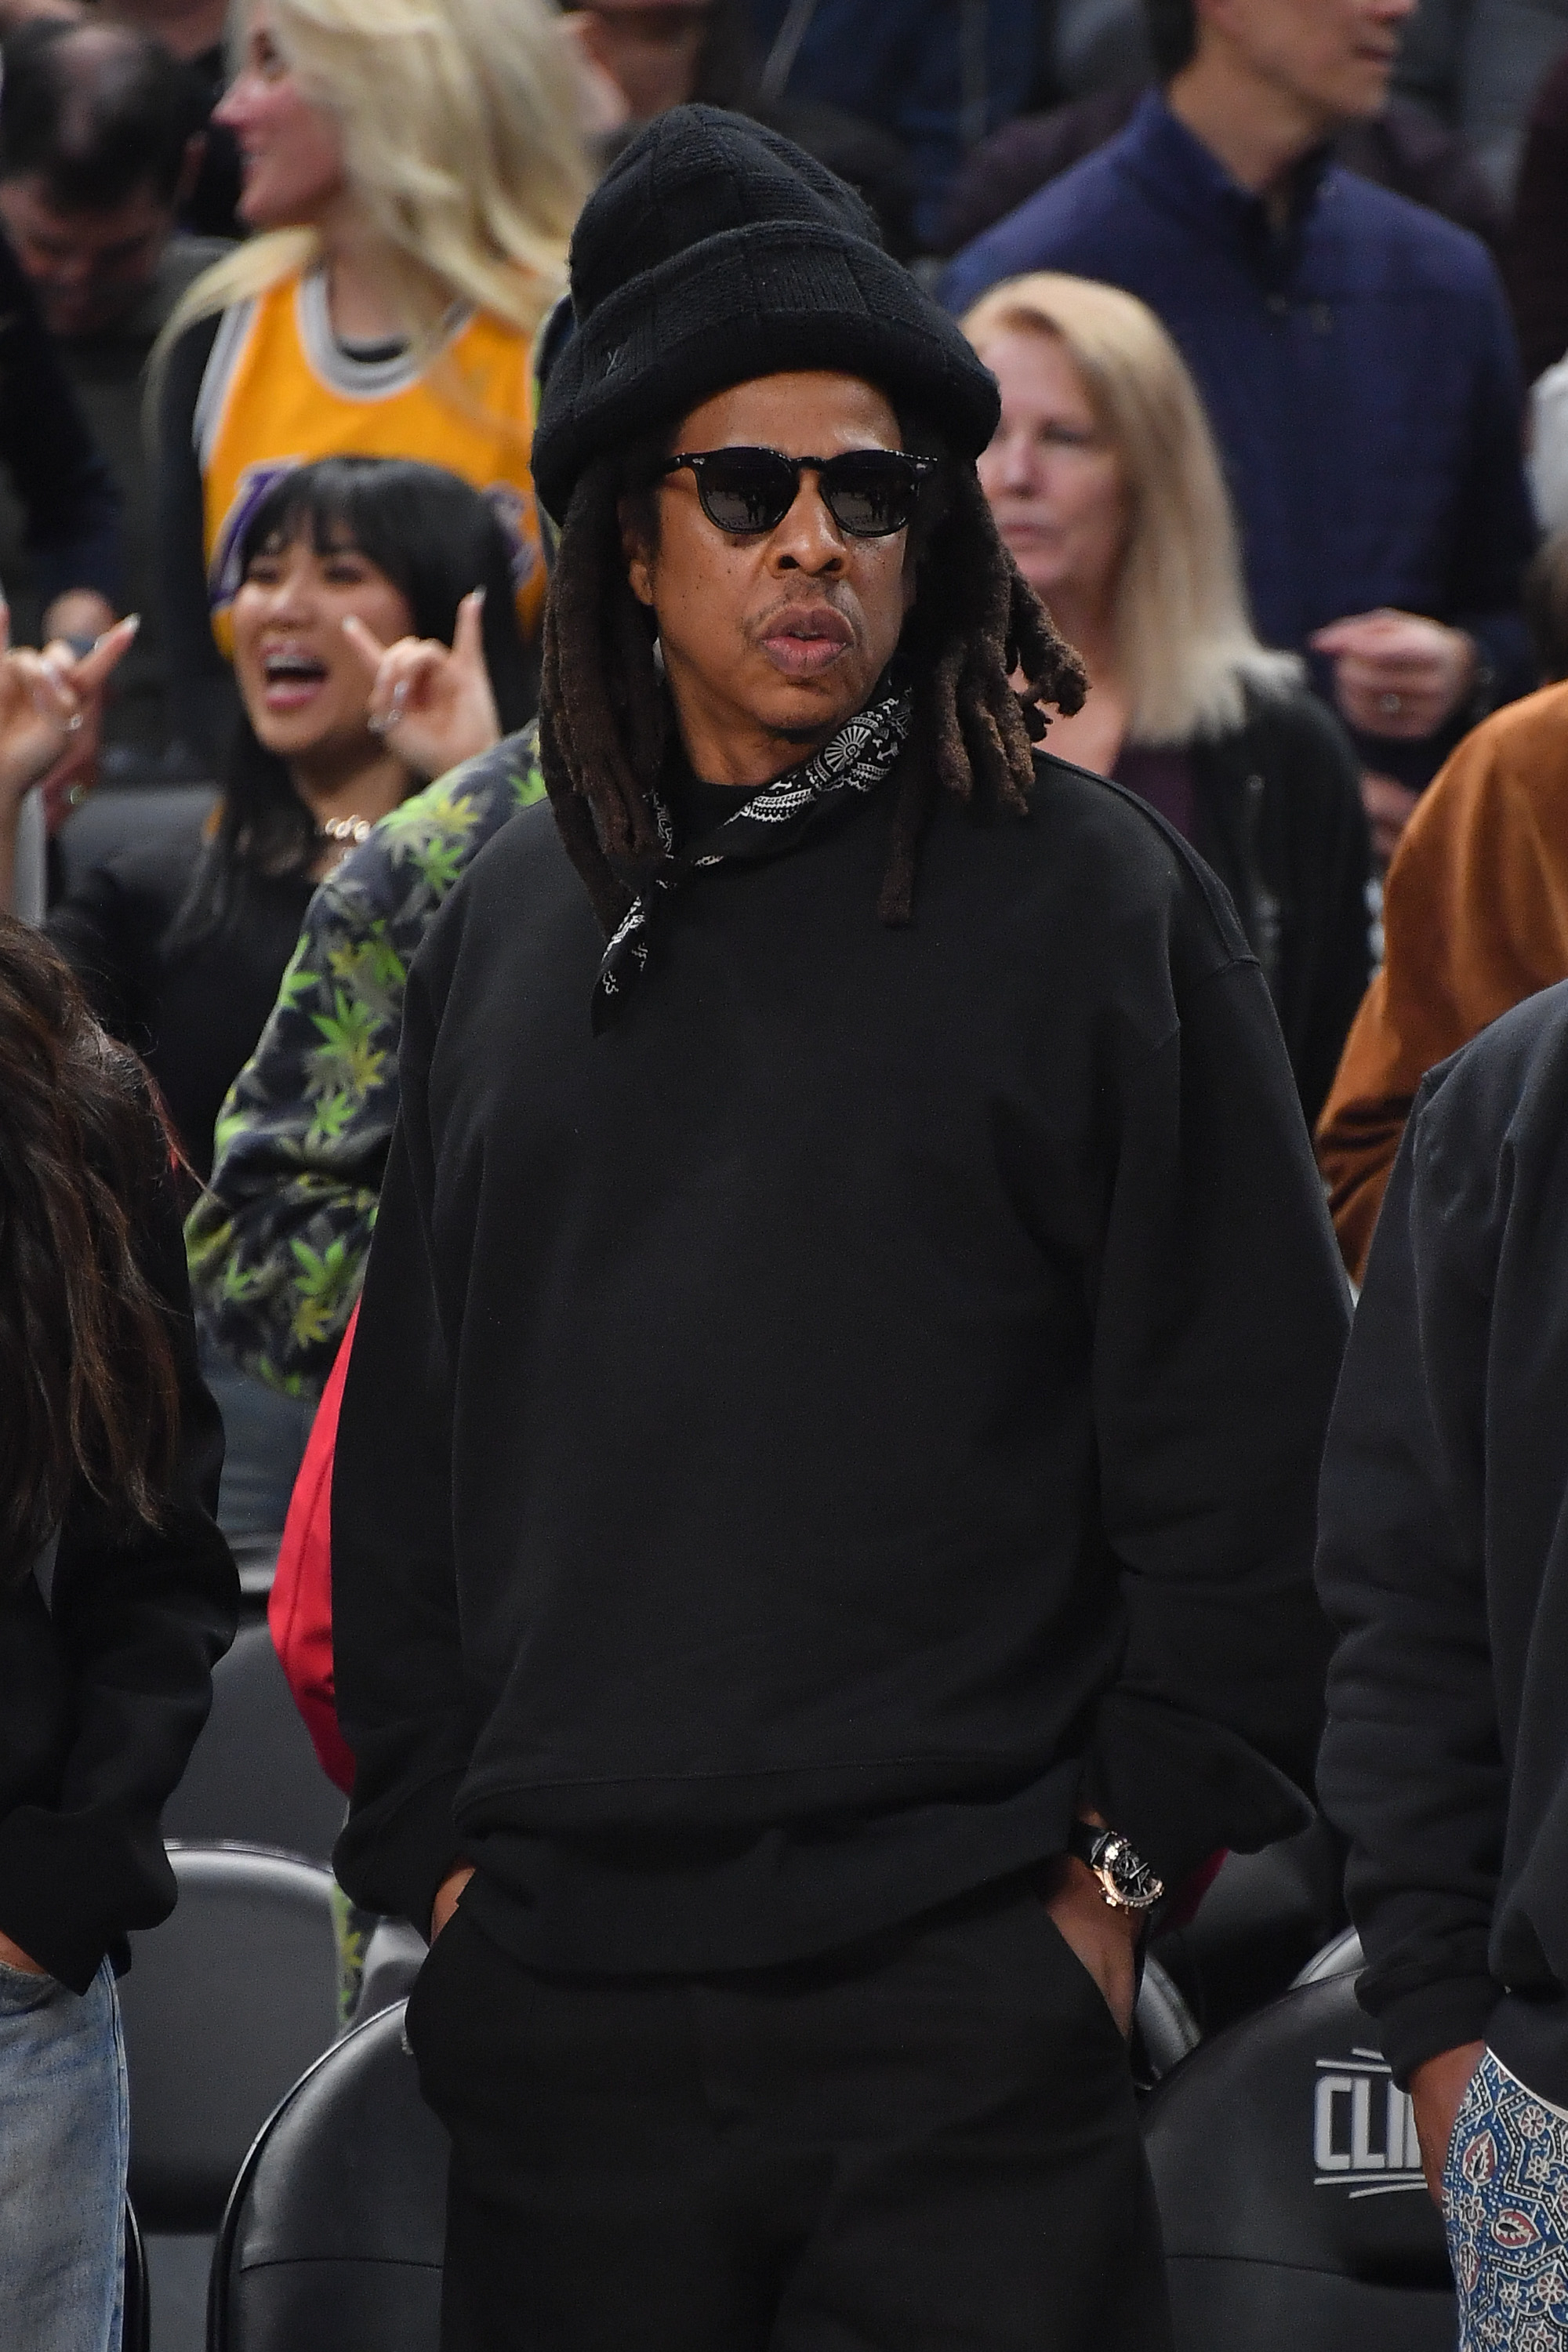 Jay-Z in dark attire, sunglasses, and hat at a sports event with spectators in the background